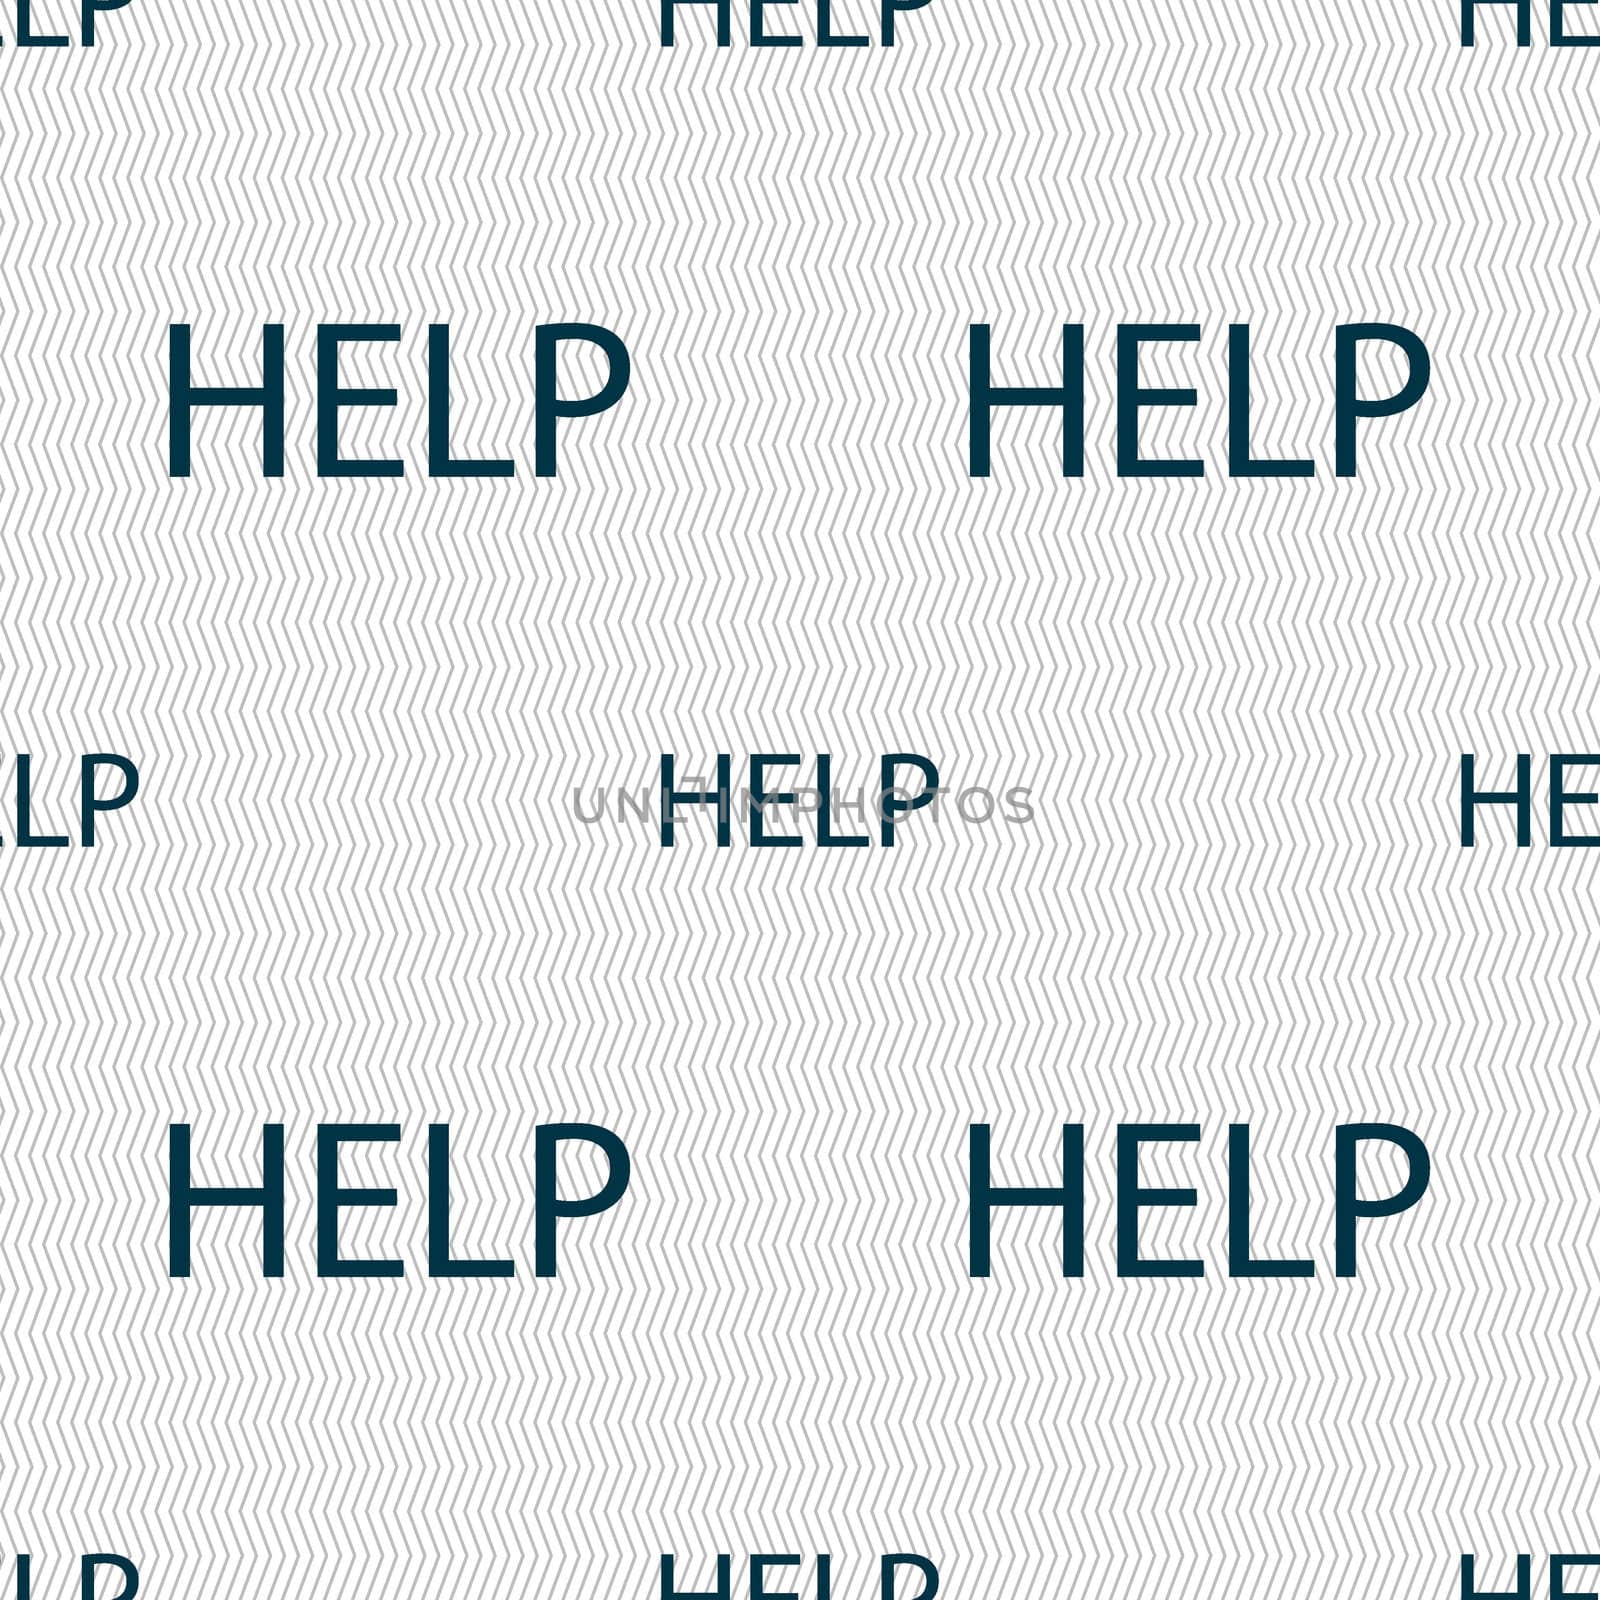 Help point sign icon. Question symbol. Seamless abstract background with geometric shapes. illustration